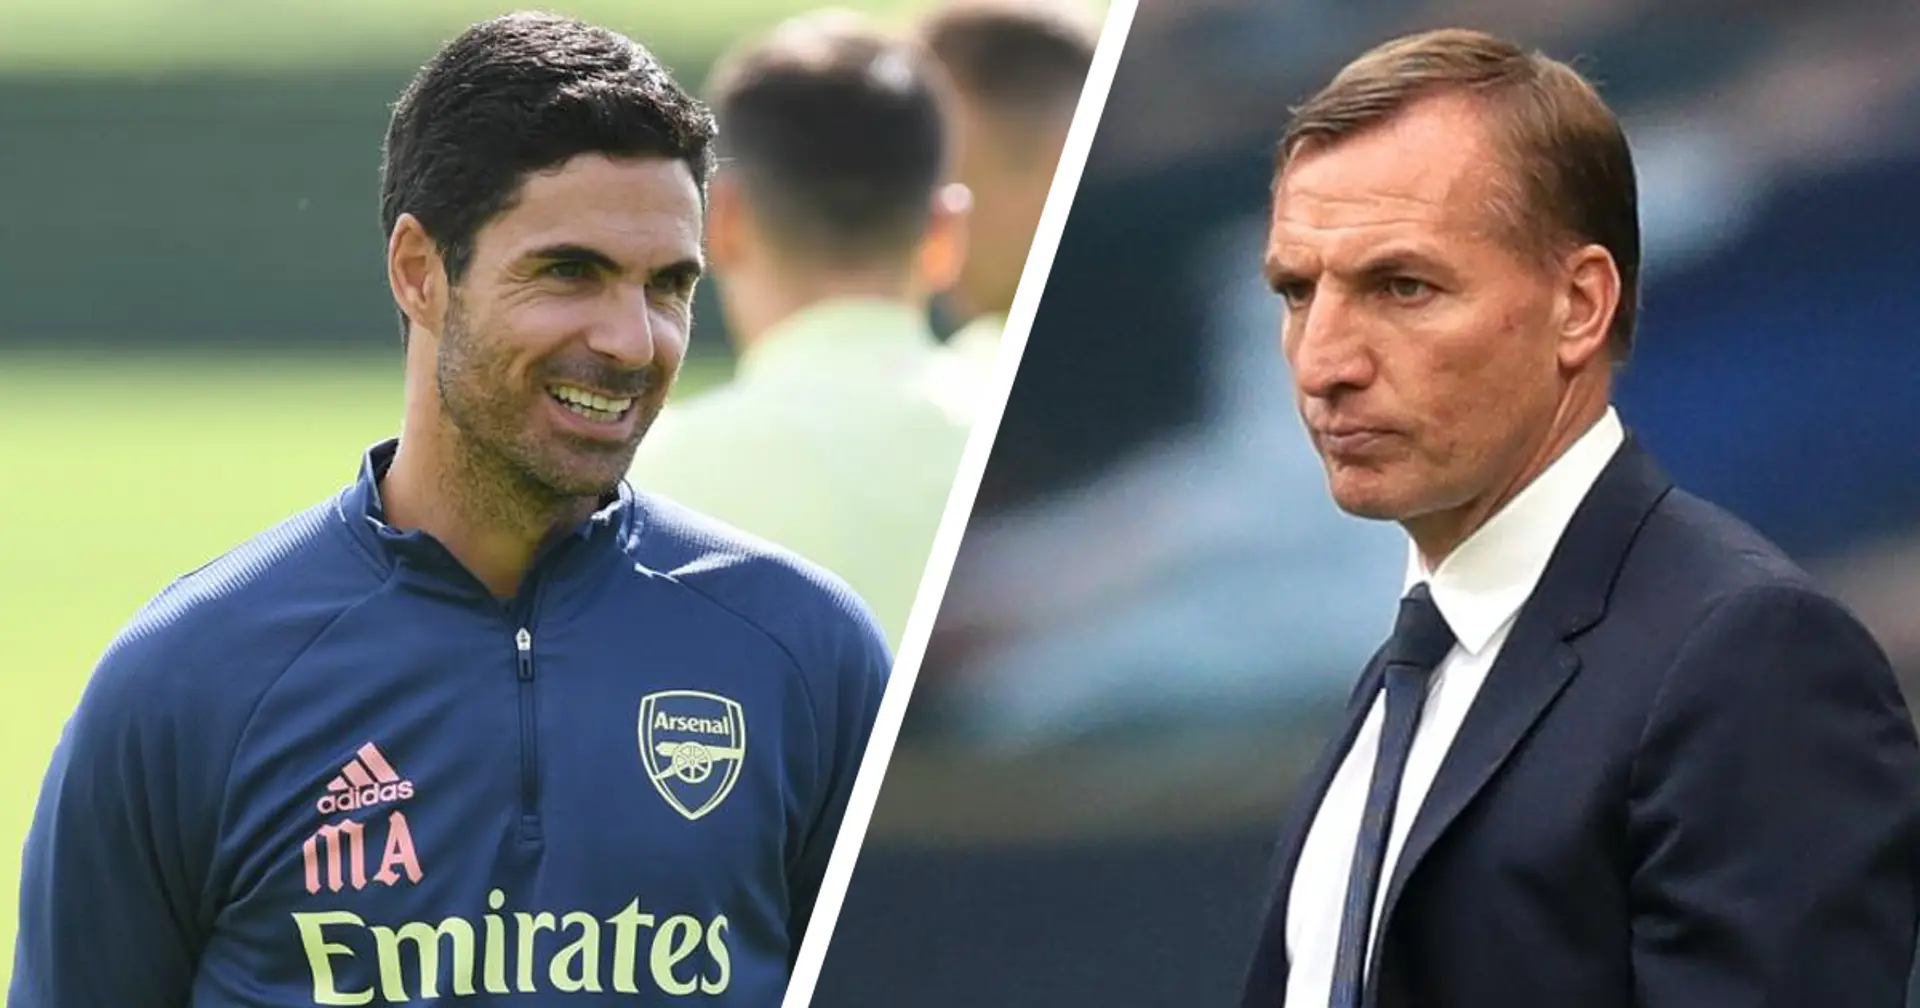 Leicester vs Arsenal preview: lineups, team news & predictions